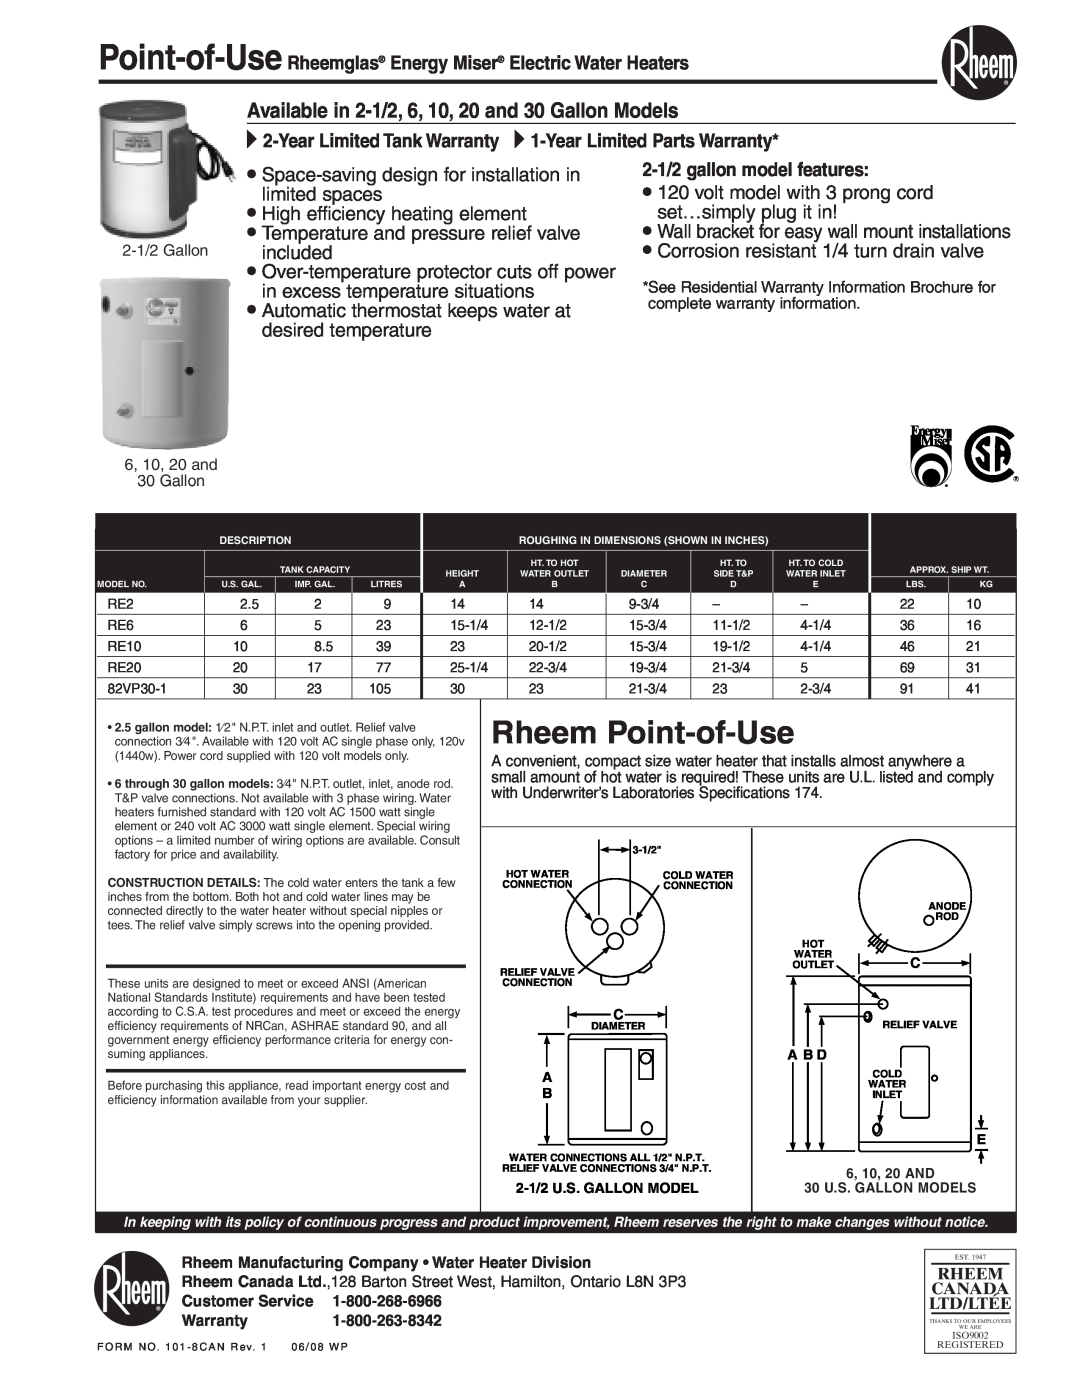 Rheem RE2 warranty Rheem Point-of-Use, Available in 2-1/2, 6, 10, 20 and 30 Gallon Models, 2-1/2 gallon model features 